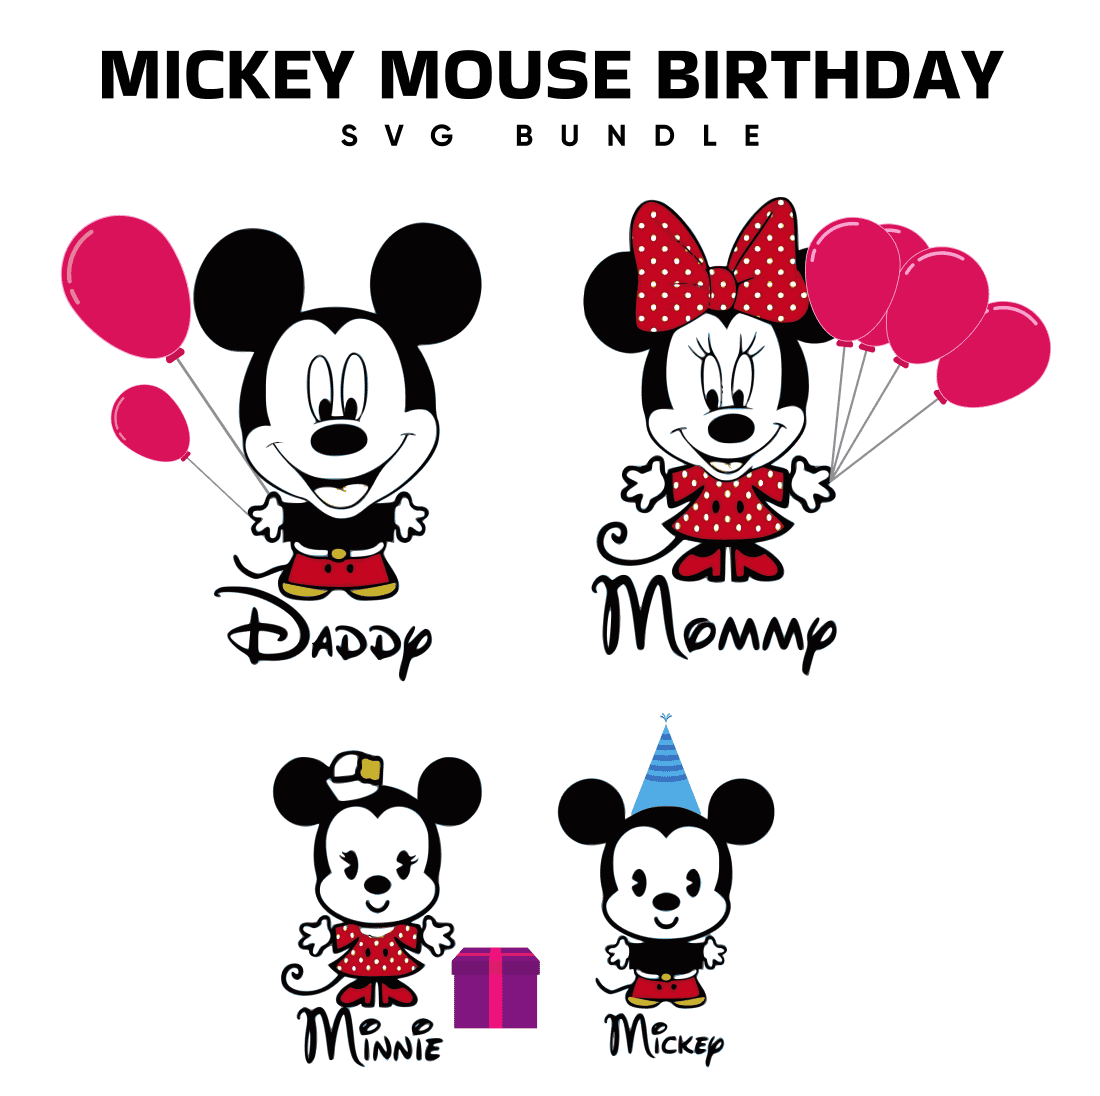 A collection of adorable images birthday of Minnie Mouse and Mickey Mouse.